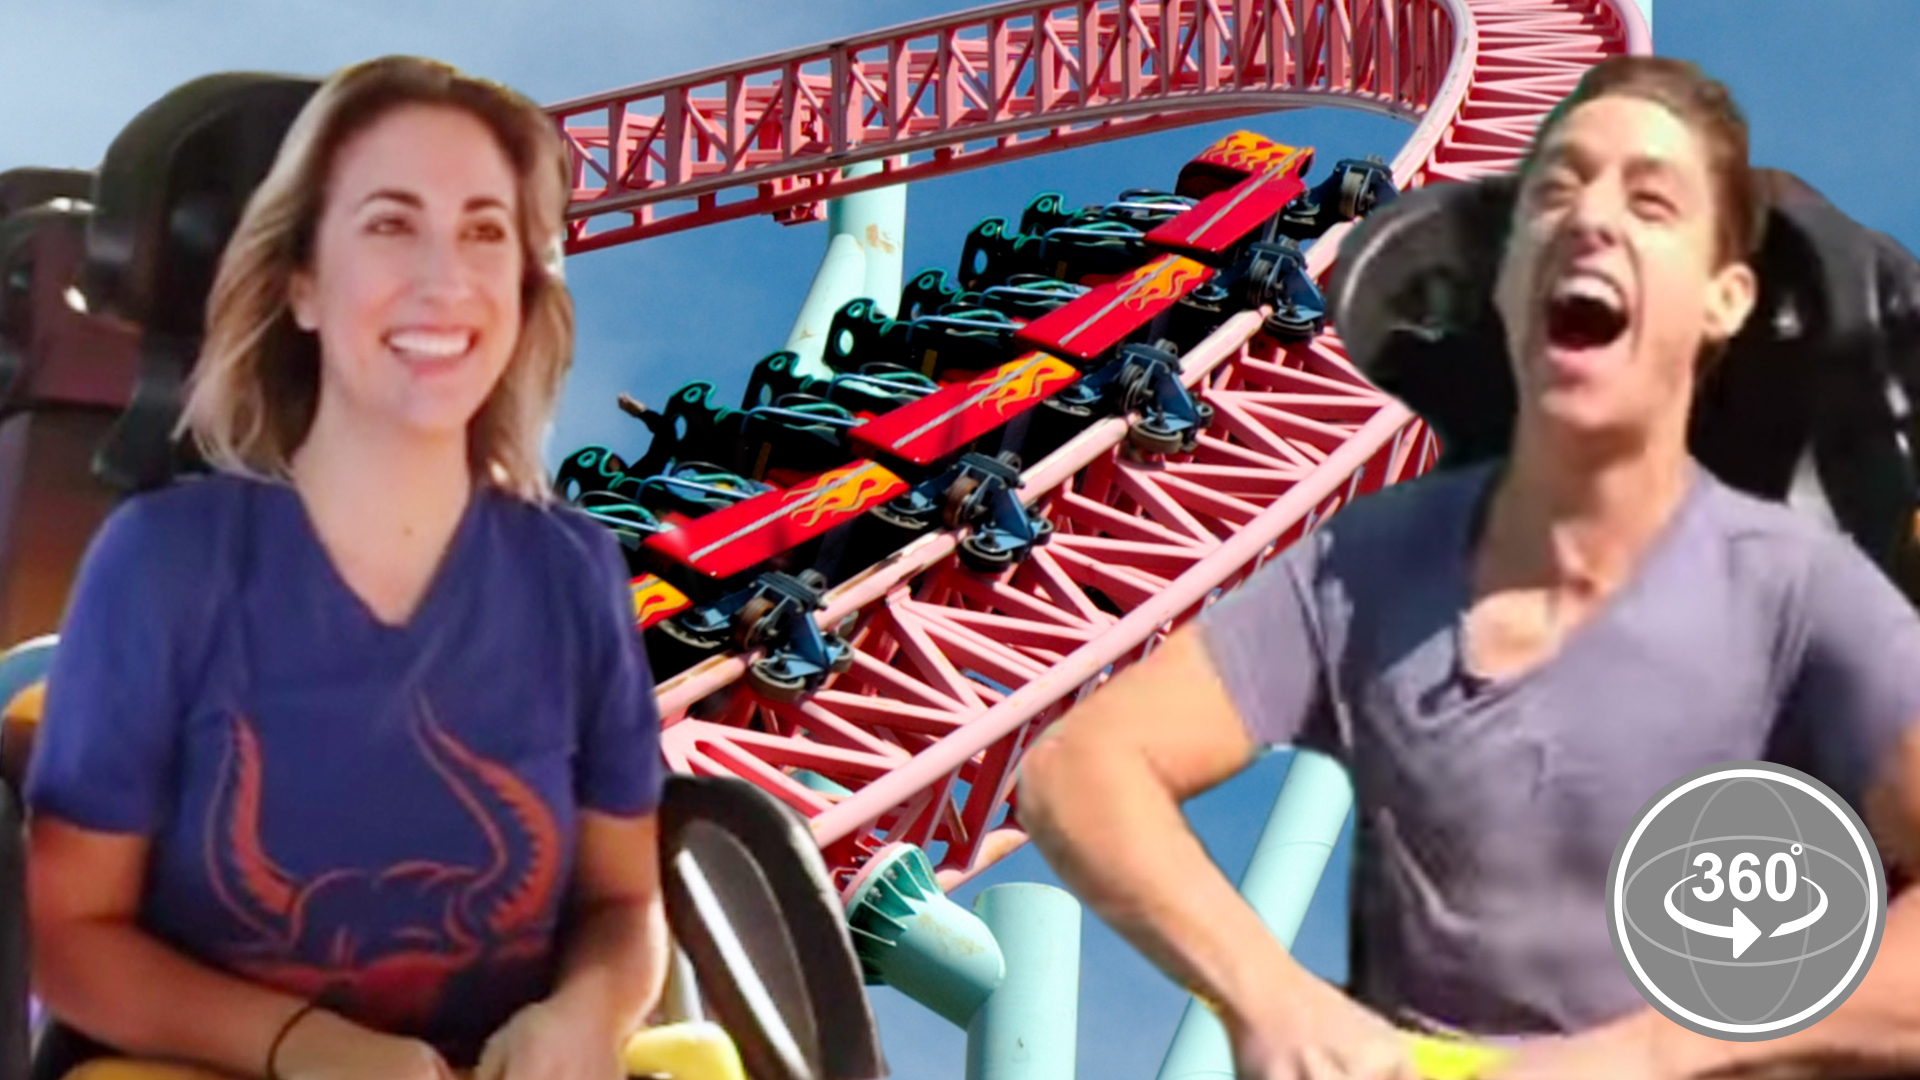 People Afraid Of Roller-Coasters Ride One For The First Time (360) .